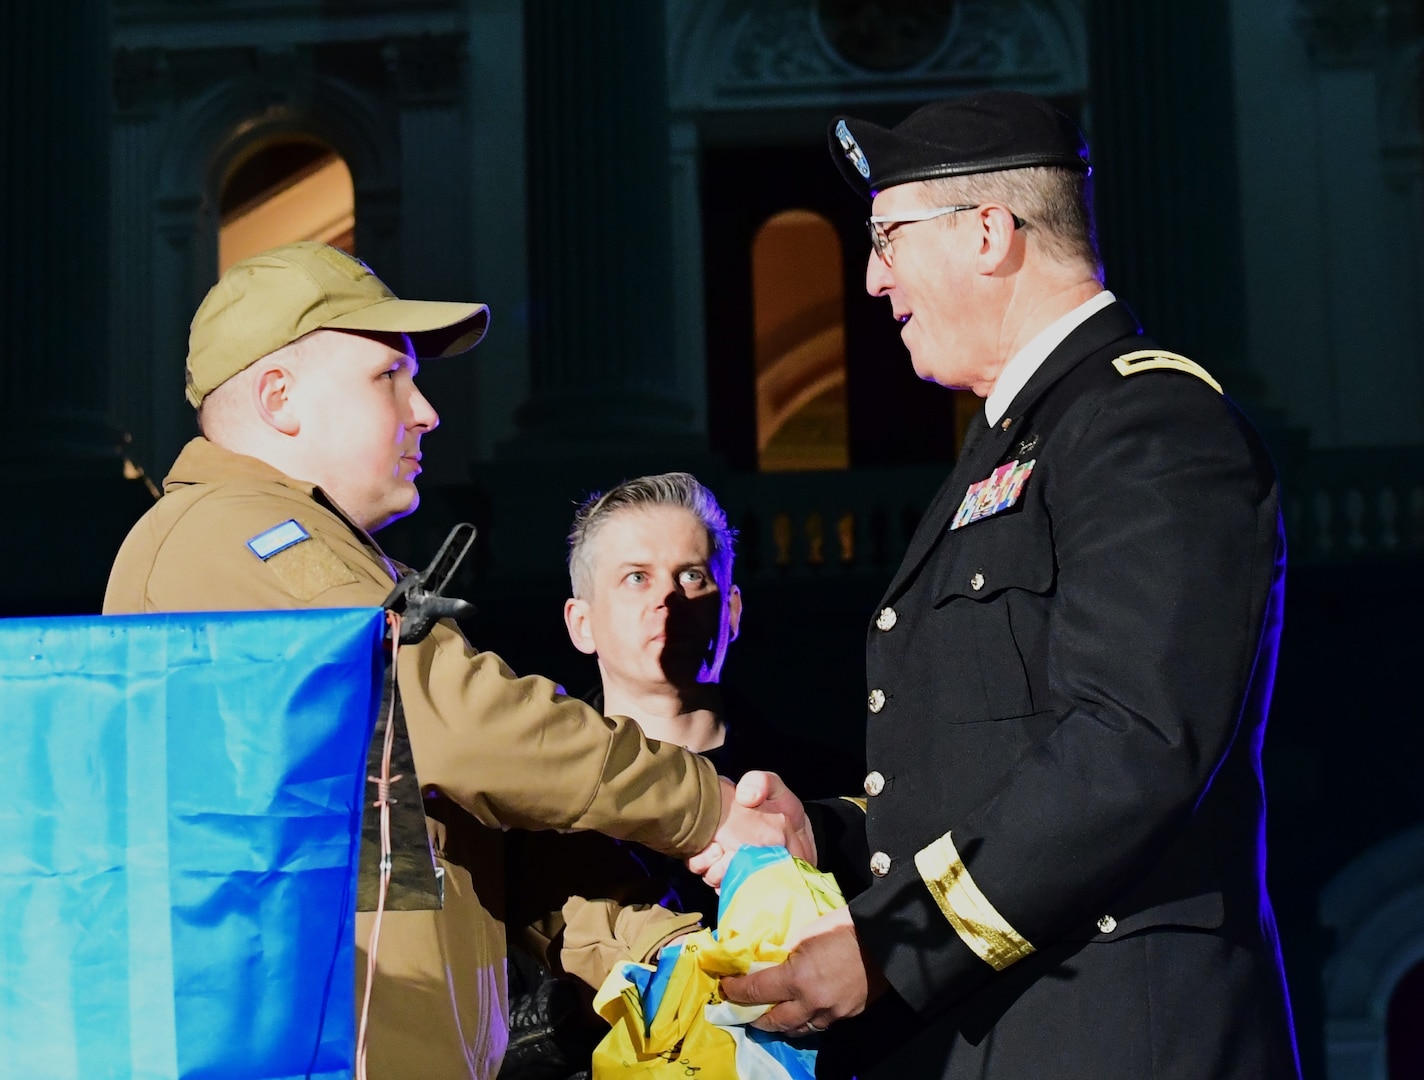 A double-amputee Ukrainian soldier presents a Ukrainian flag signed by fellow Ukrainian soldiers to Maj. Gen. Matthew P. Beevers, acting adjutant general of the California National Guard, in Sacramento, California, Feb. 24, 2023.